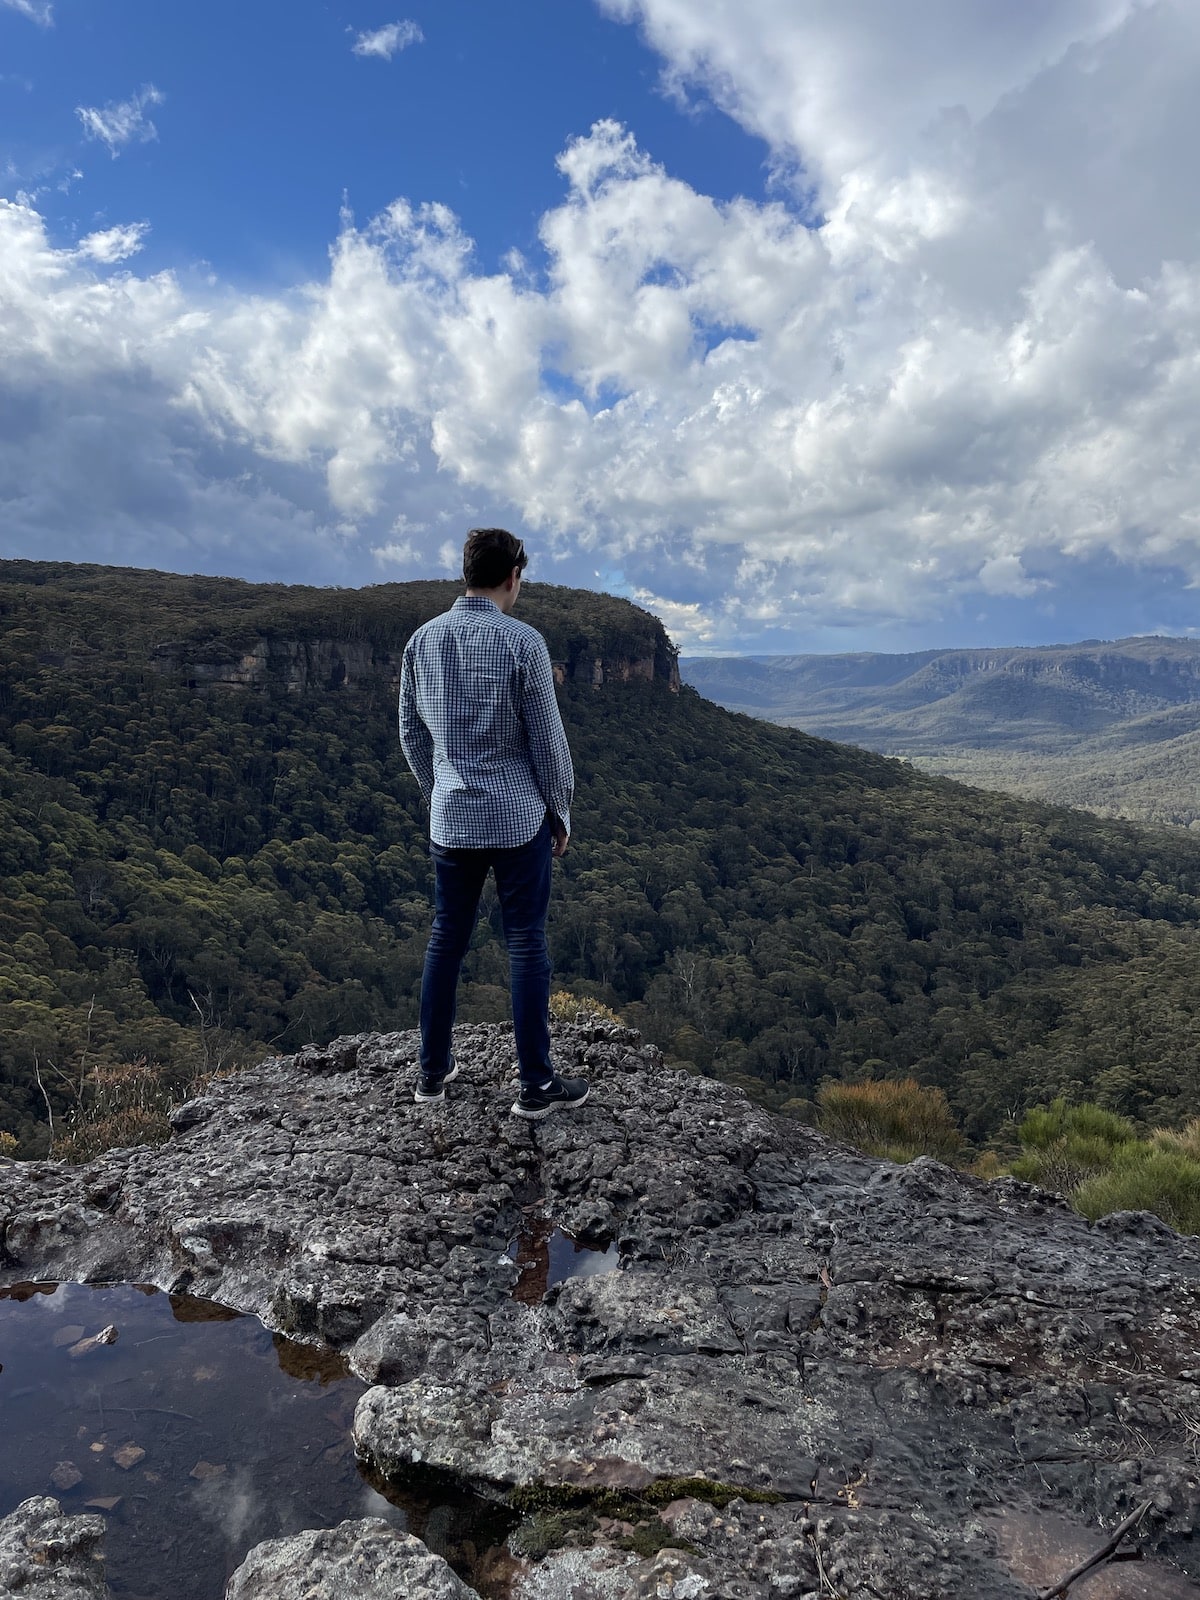 Nick, wearing a checkered shirt and dark jeans, standing at a cliff edge with green trees in the distance. The sky is bright blue with clouds. In the foreground is a small puddle of rainwater filling a hole in the rock of the cliff